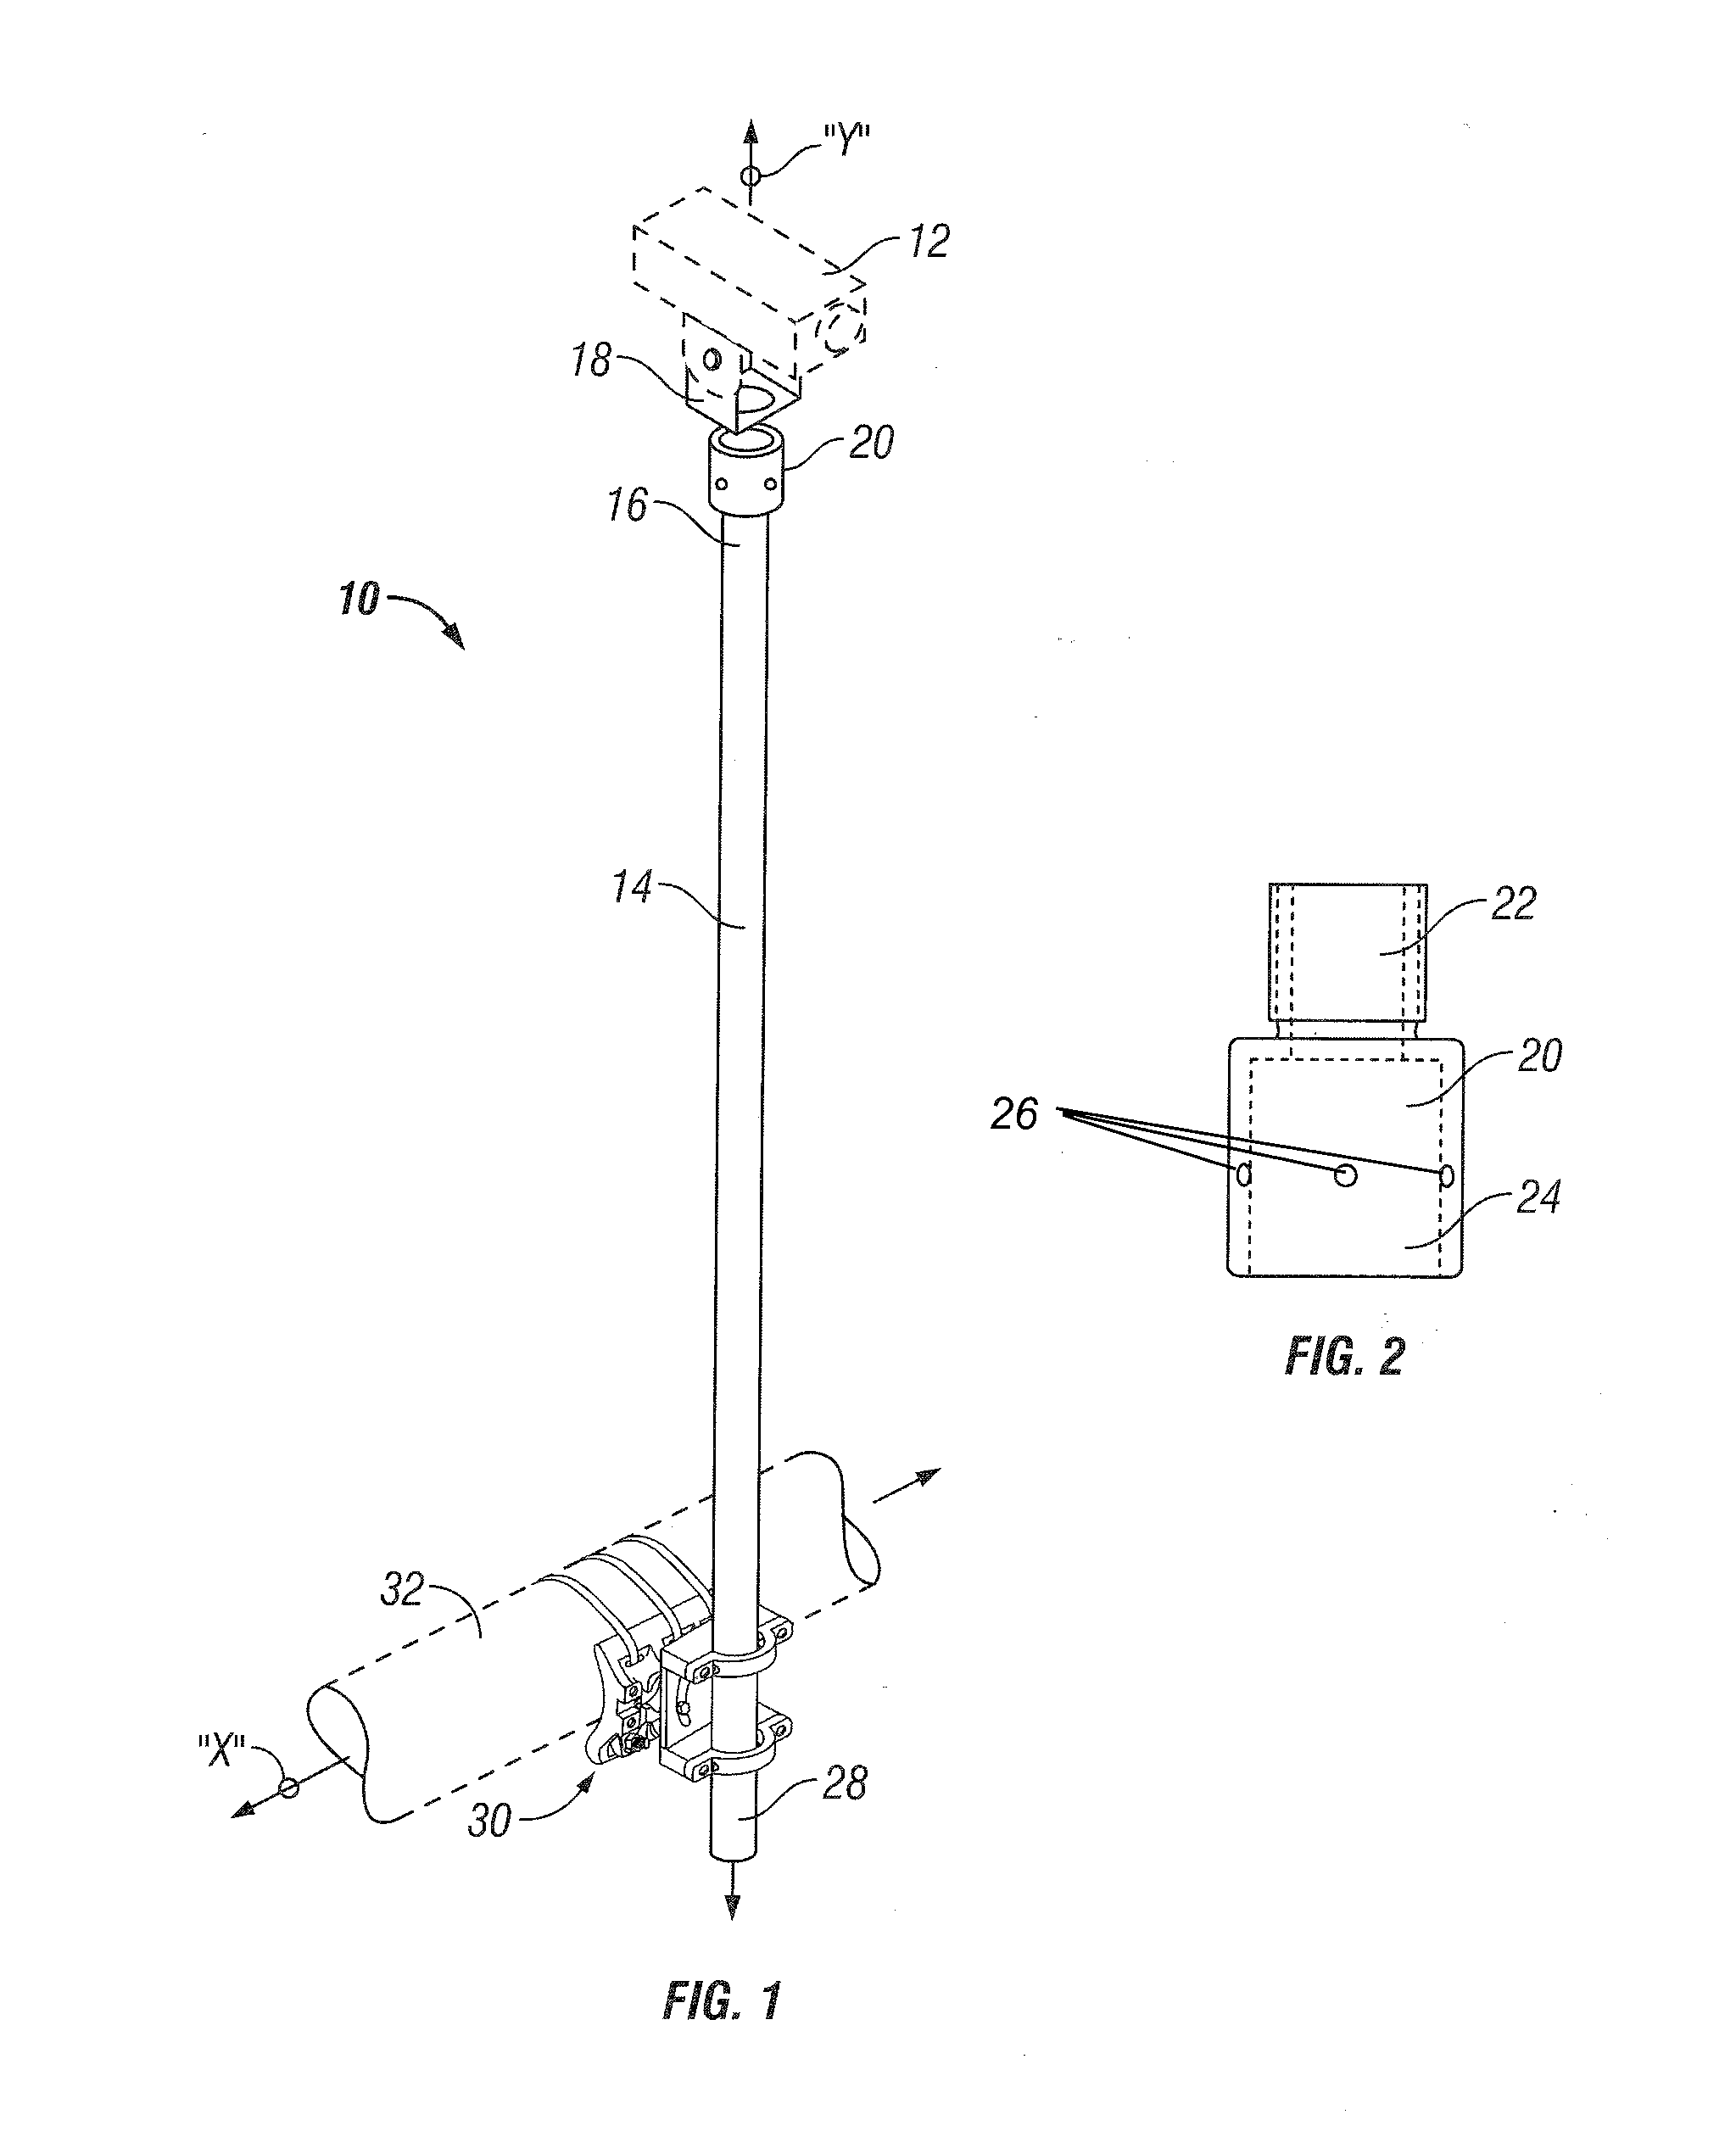 Mounting assembly for traffic cameras and other traffic control devices